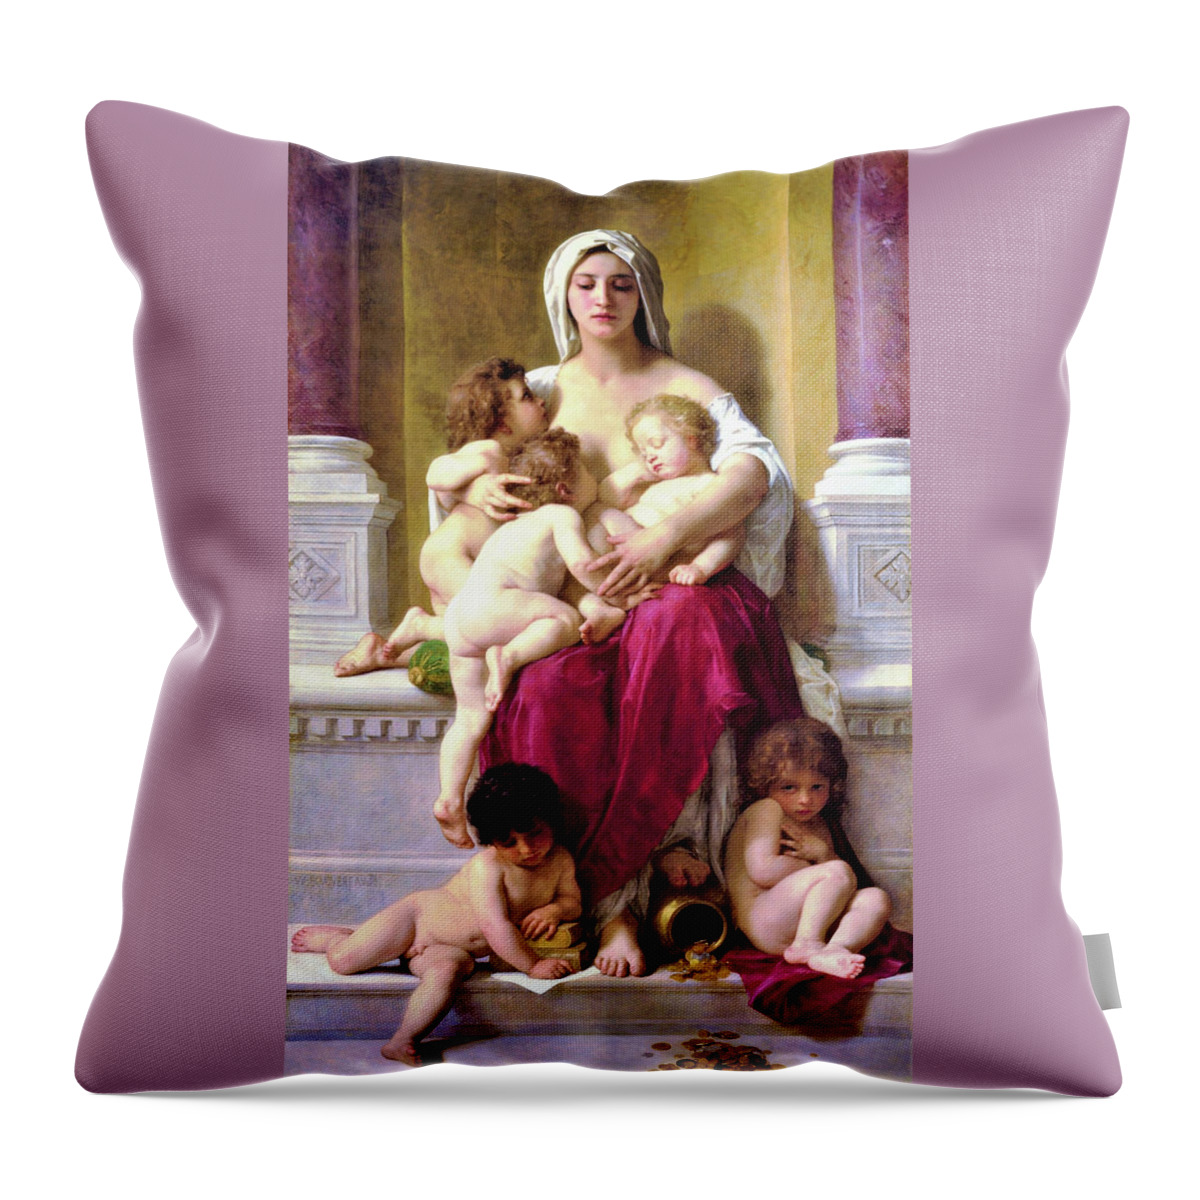 Charity Throw Pillow featuring the painting Charity - Digital Remastered Edition by William-Adolphe Bouguereau